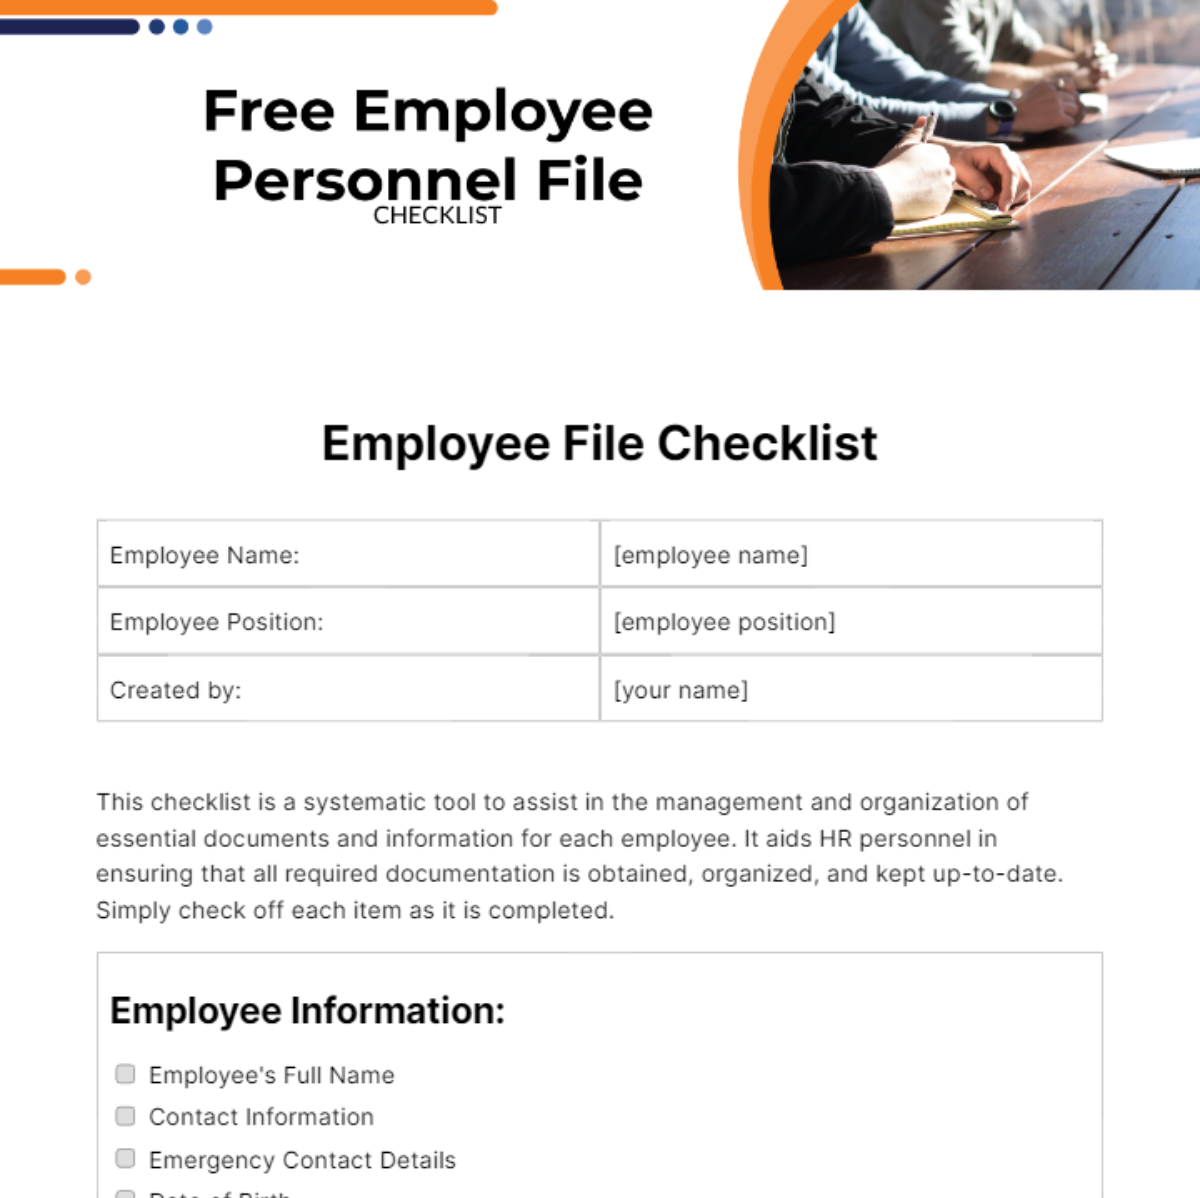 Employee Personnel File Checklist Template - Edit Online & Download ...